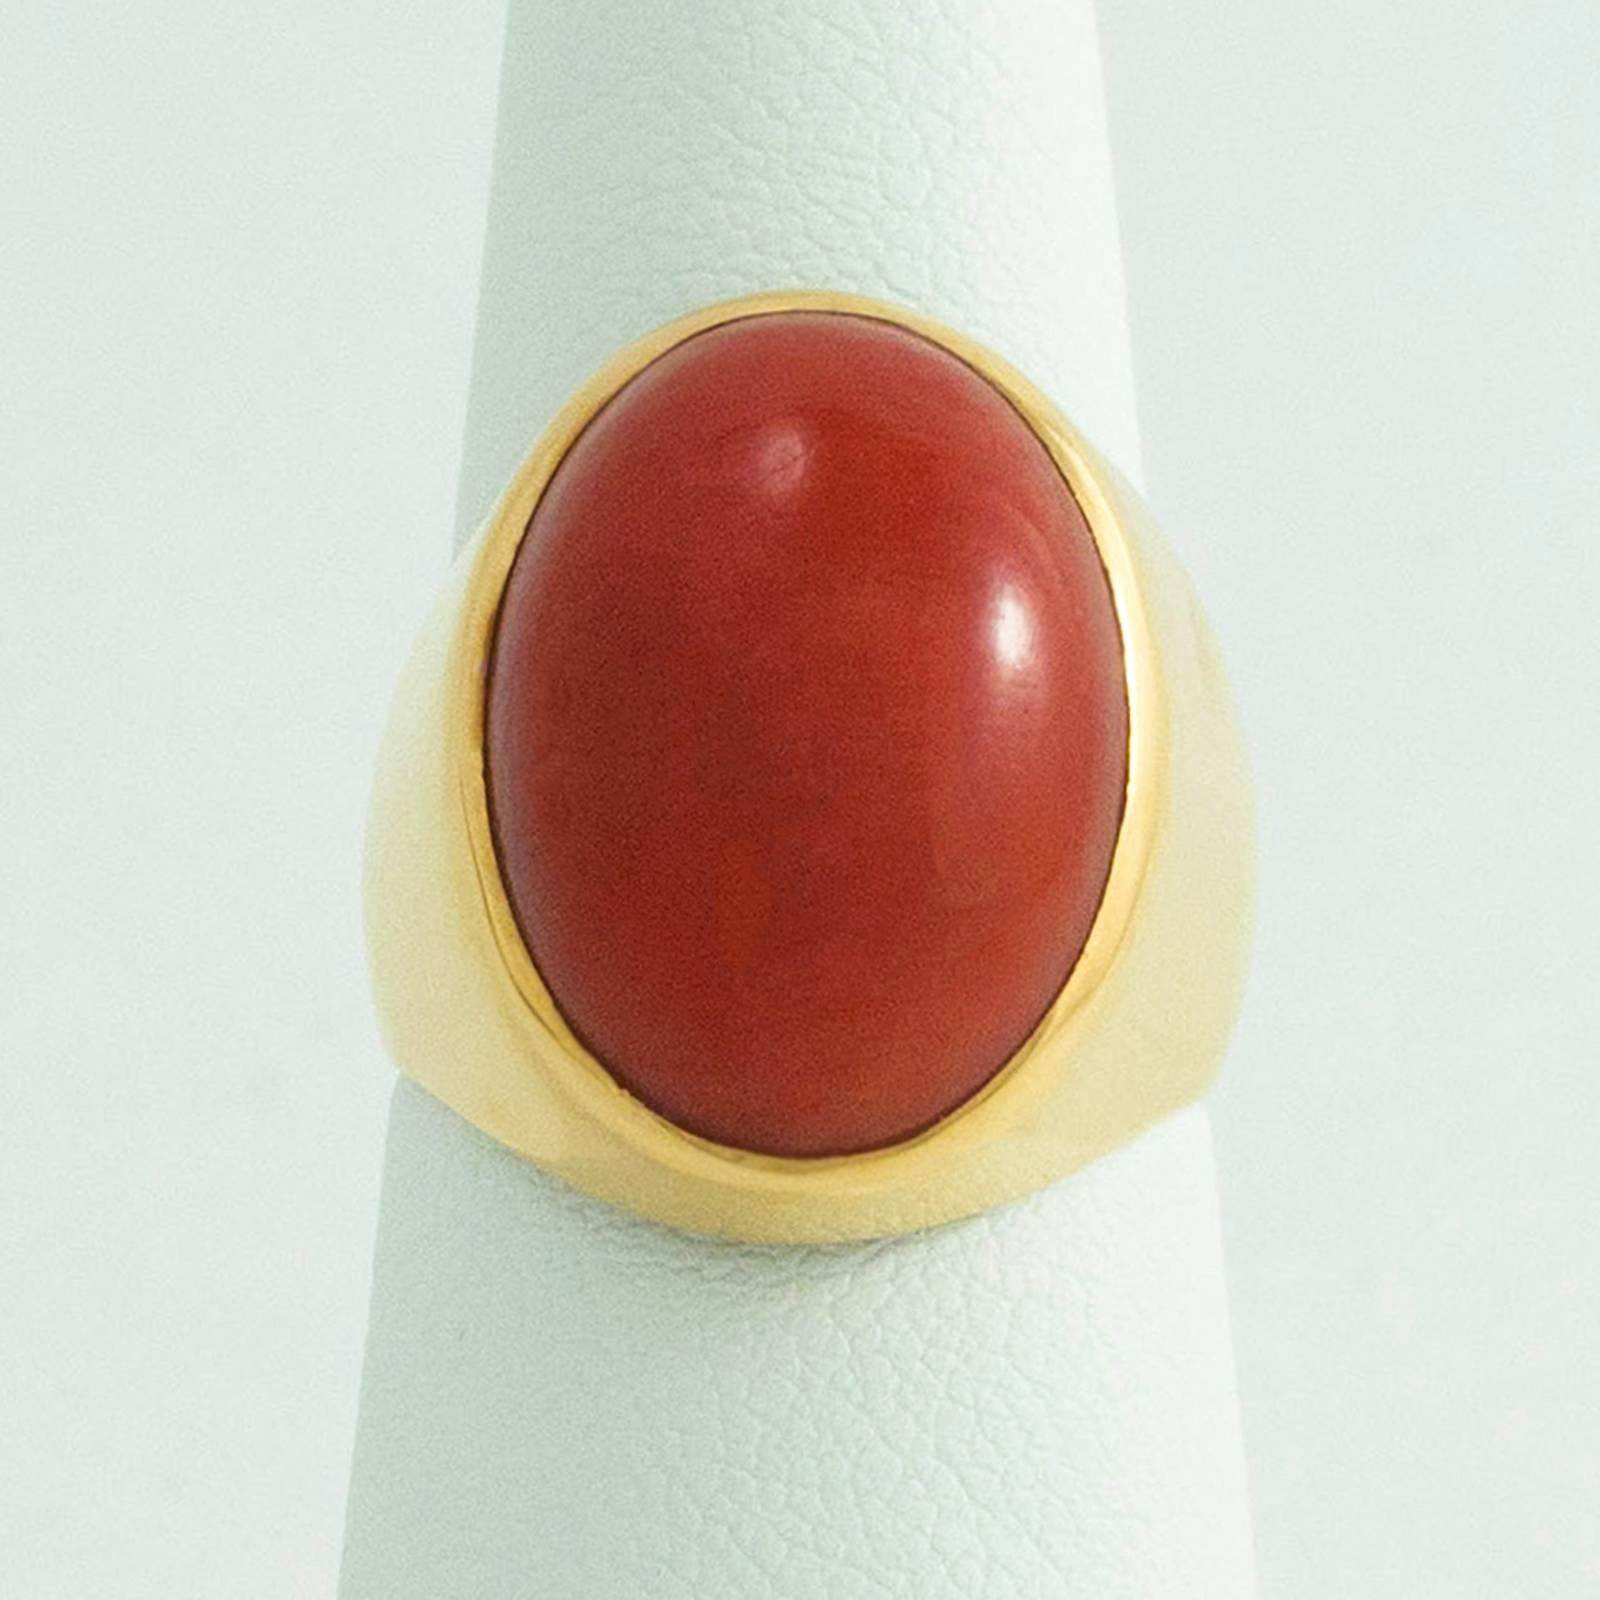 A fine Sardinian Red Coral ring crafted in 18 Karat yellow gold is simple, impressive and absolutely stunning!

The Coral is cabochon cut and measures 18.00mm north to south on the finger x 12.70mm across and 6.10mm high. It is becoming more and